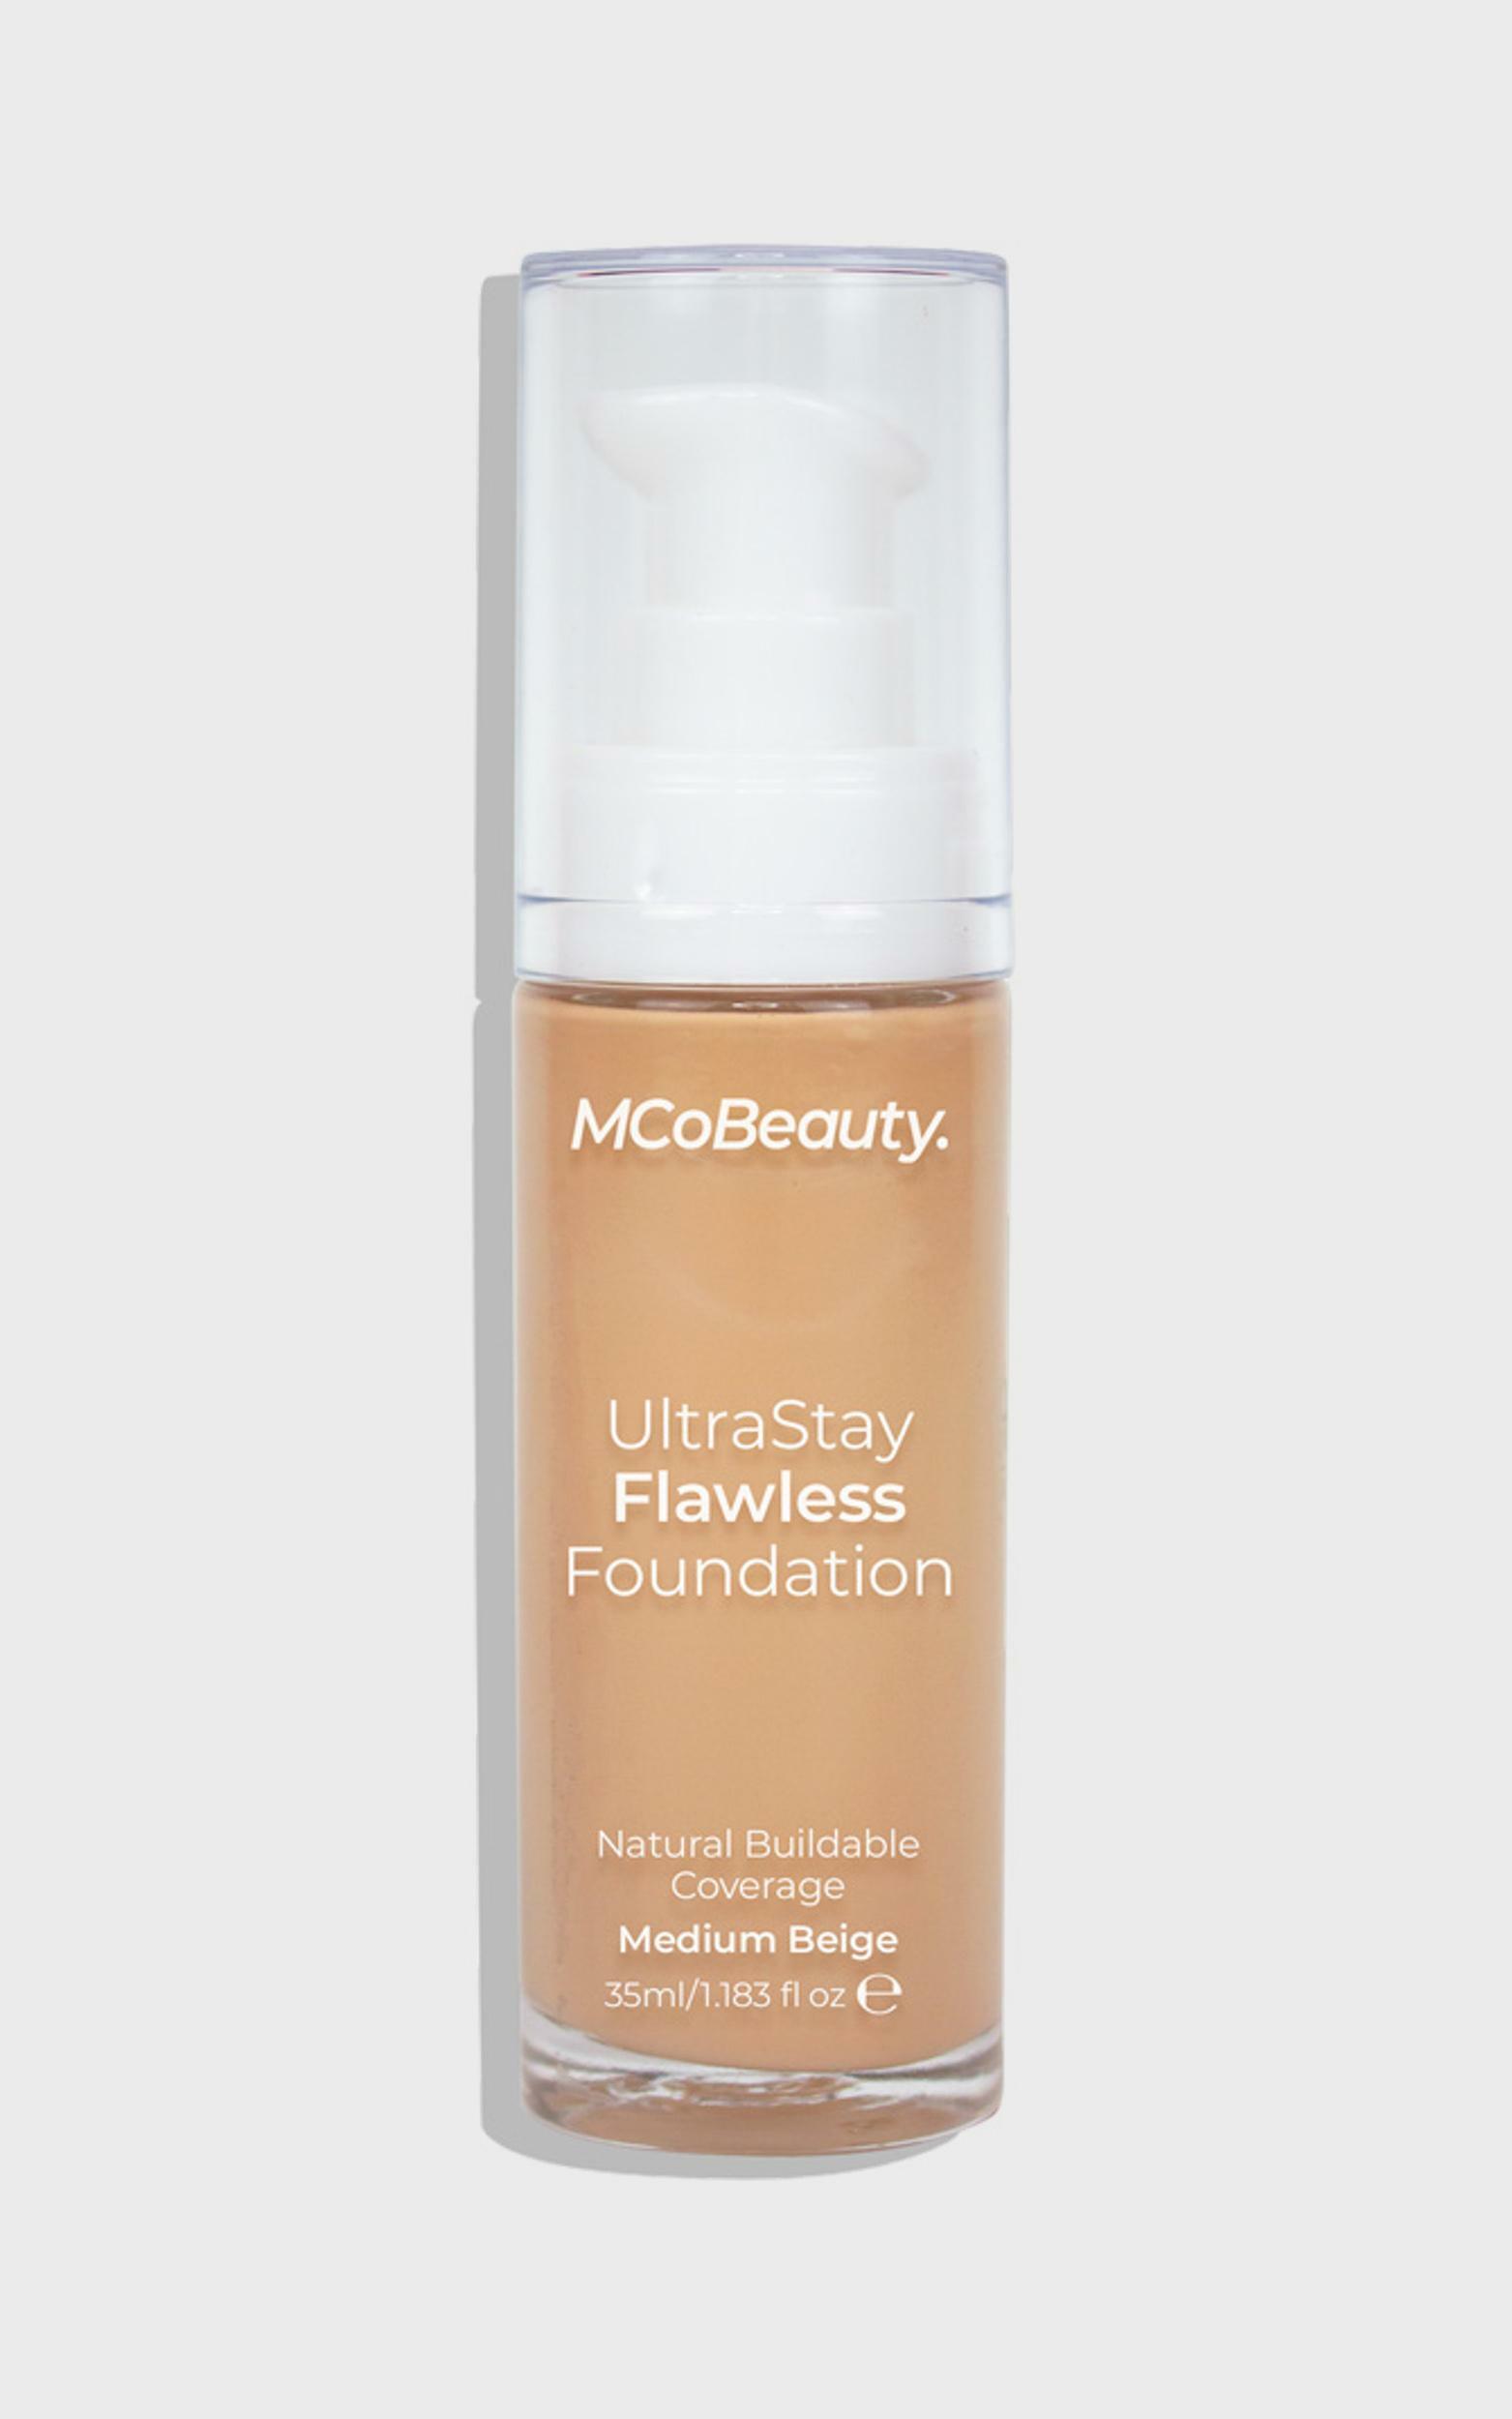 MCoBeauty - Ultra Stay Flawless Foundation in Light/Med Beige, BRN1, hi-res image number null